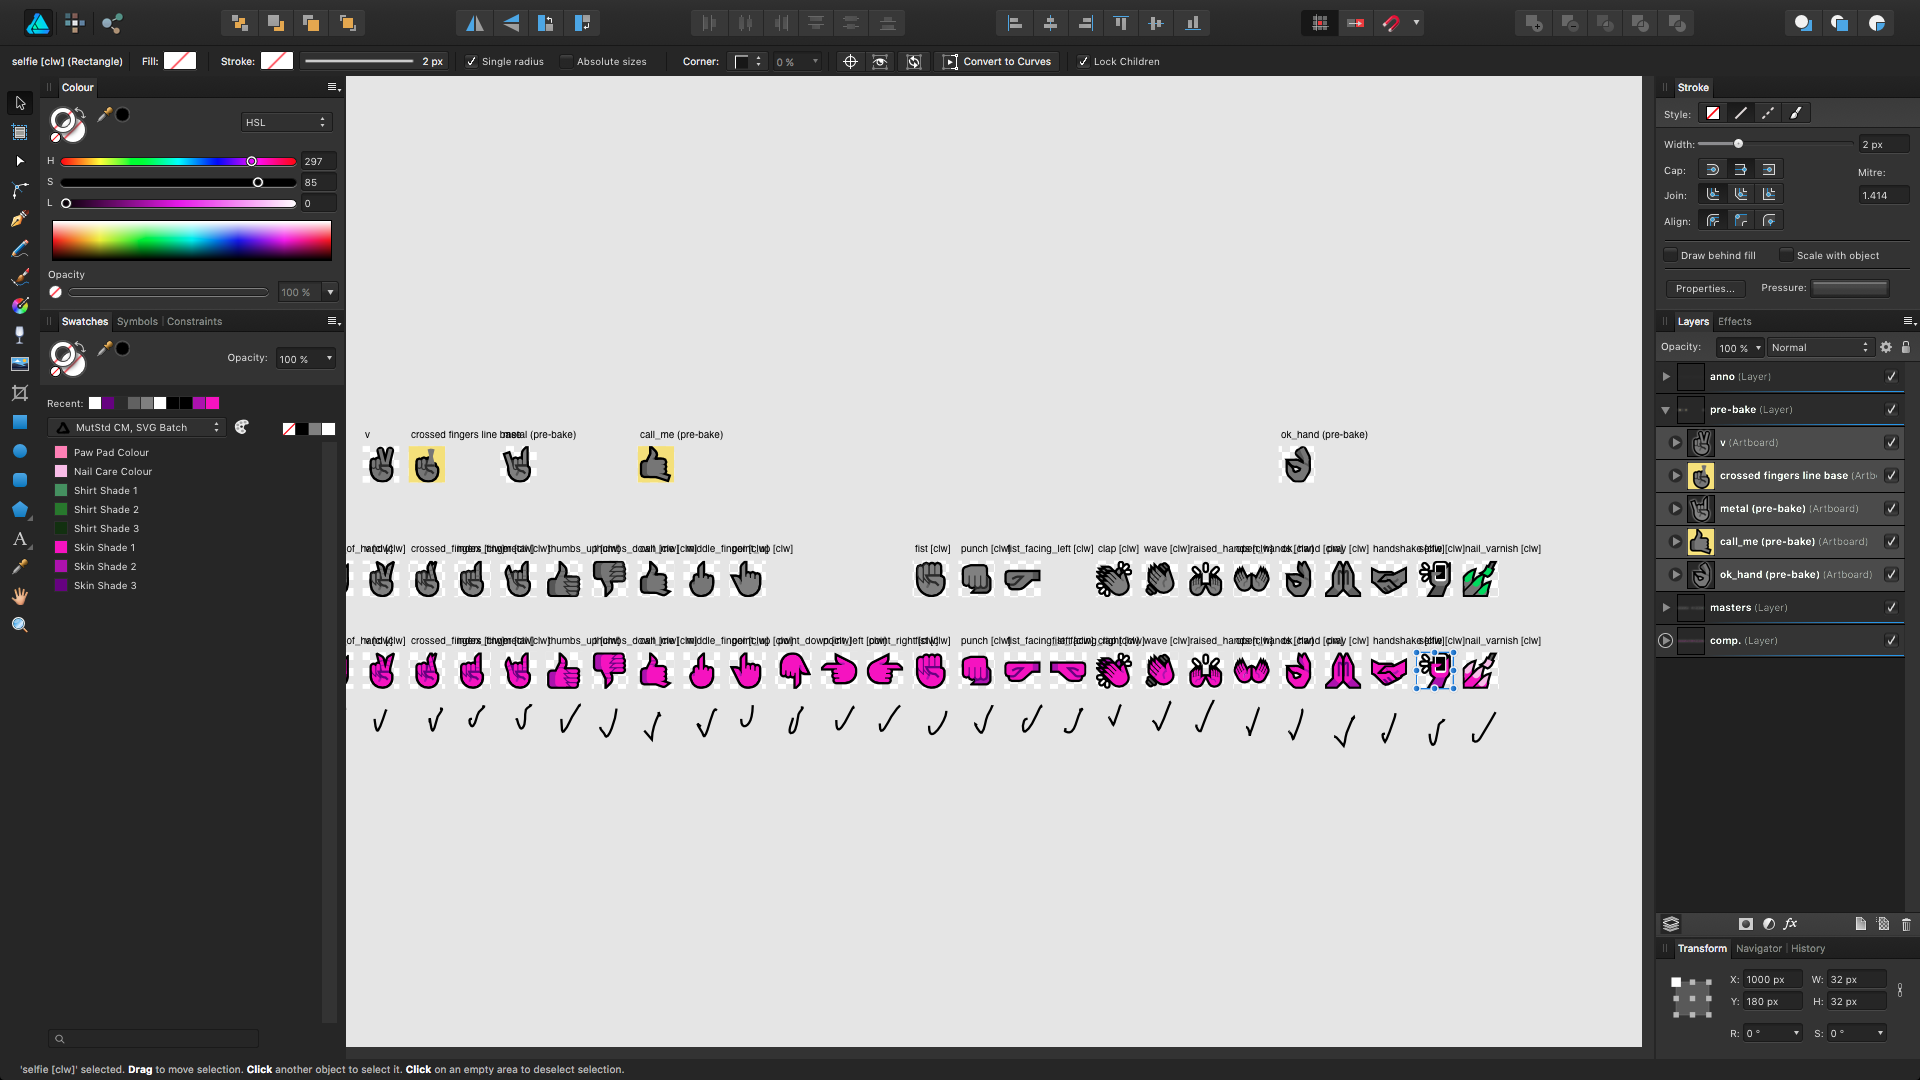 The master file for claw hand emoji (for 0.1.0) in Affinity Designer.